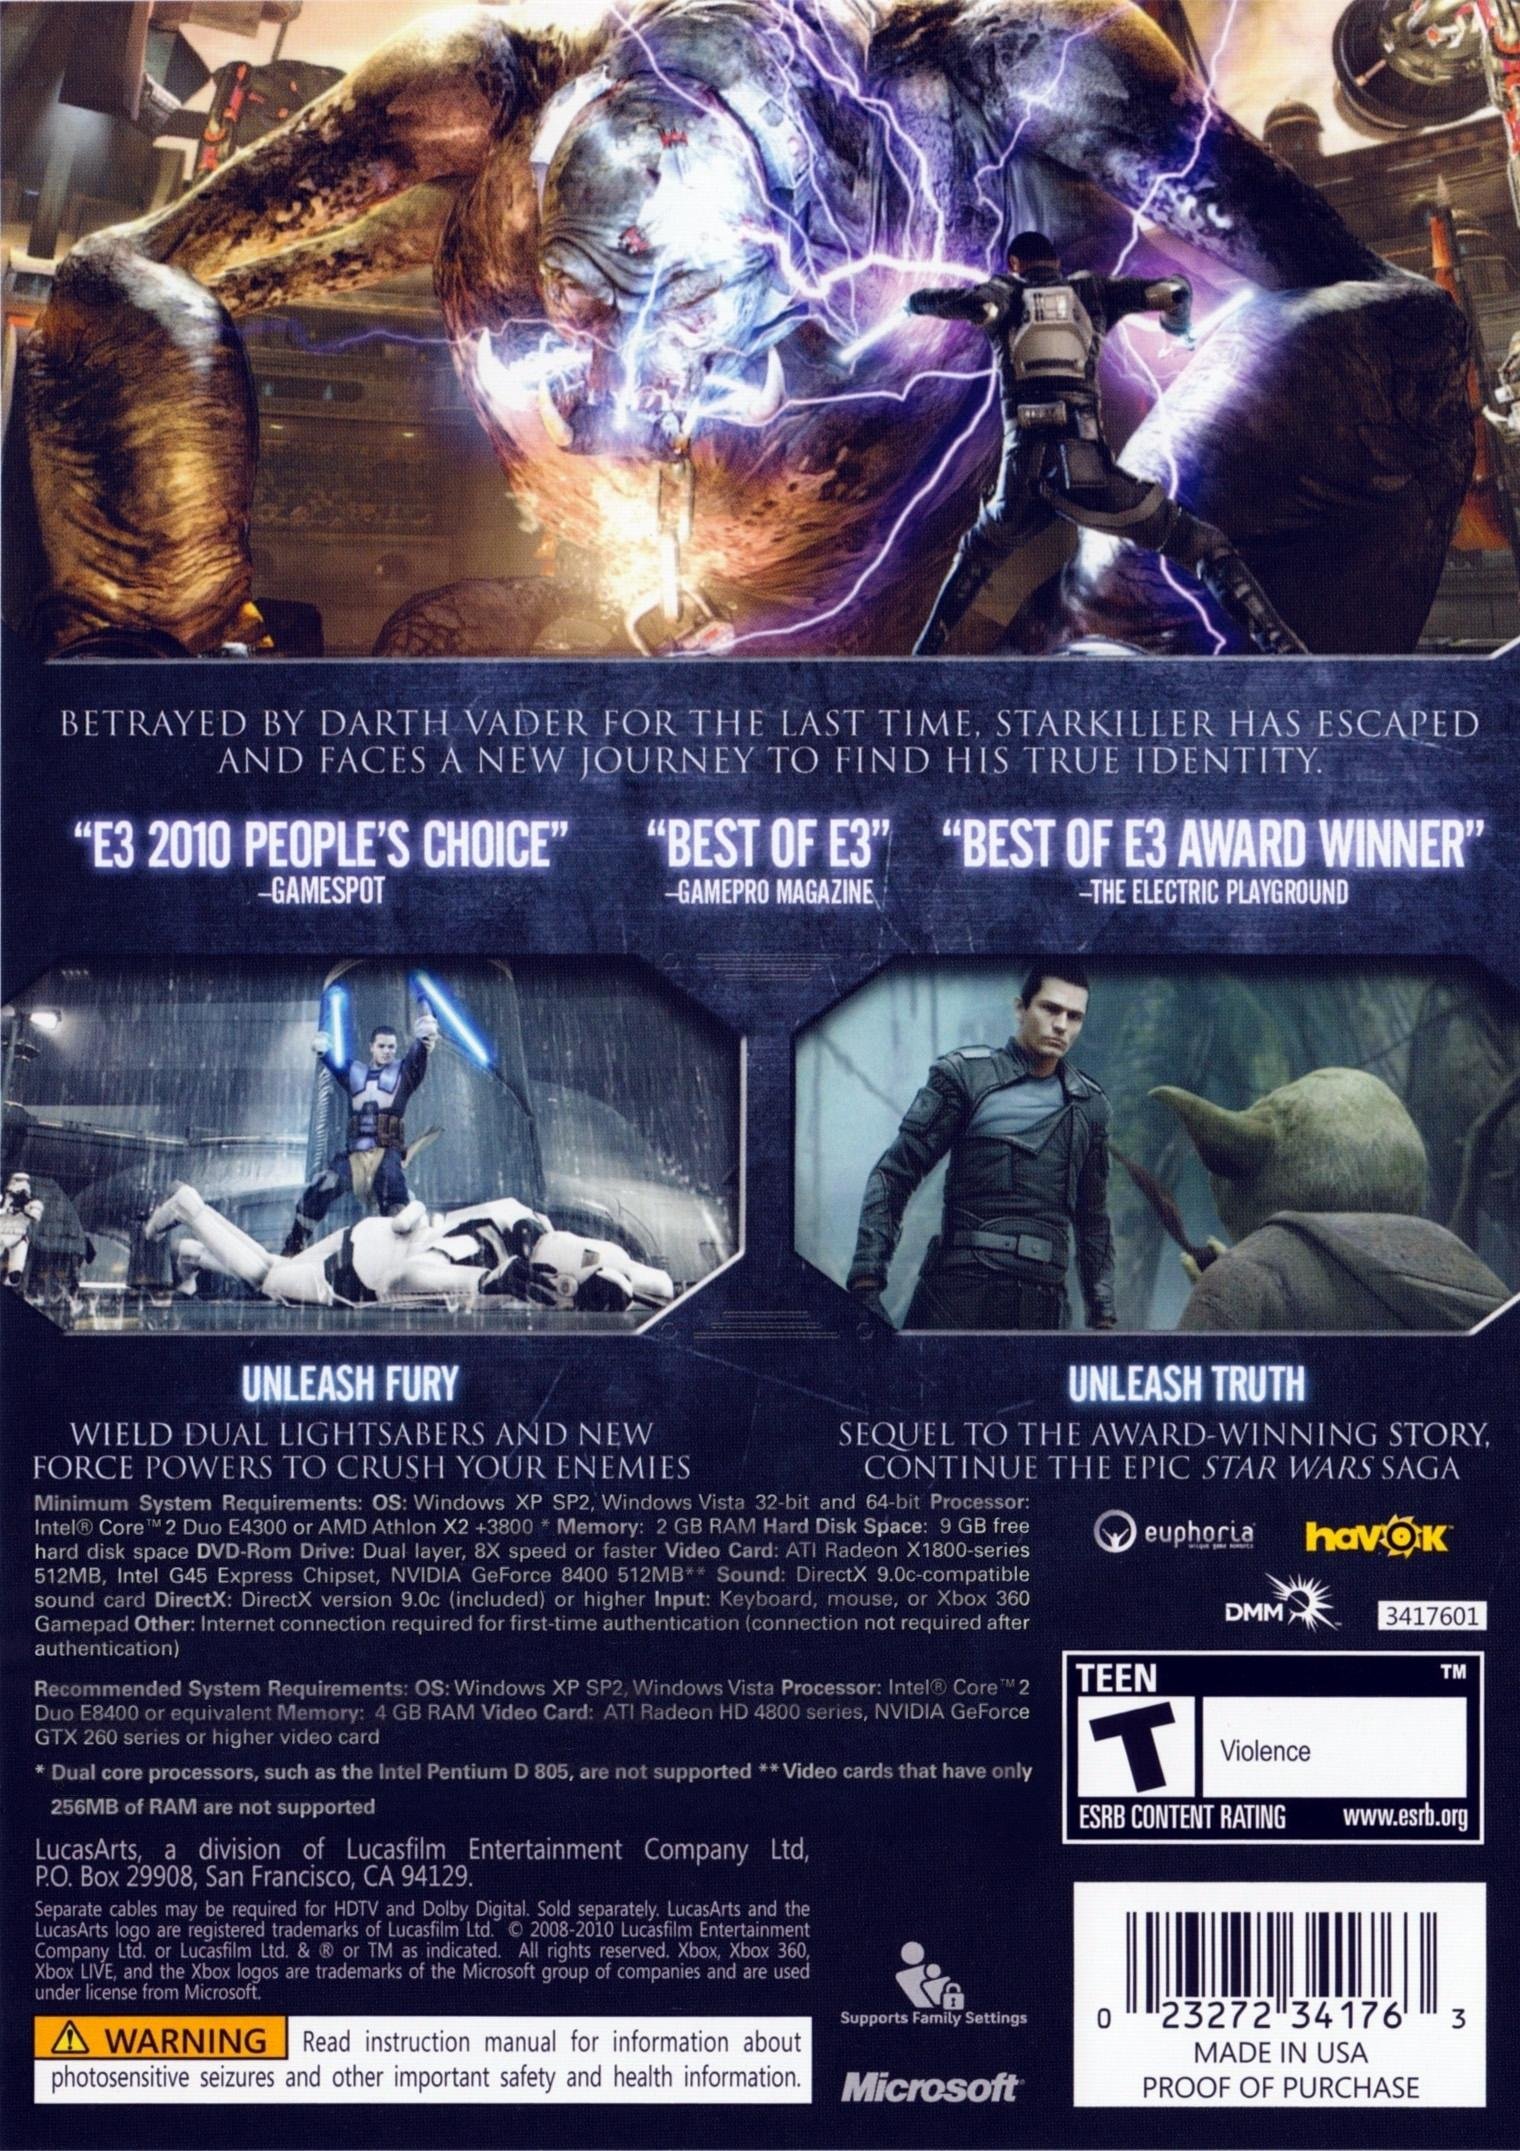 Star Wars the Force unleashed 2. Star Wars the Force unleashed системные требования. Star Wars the Force unleashed обложка. Star Wars the Force unleashed 2 обложка.